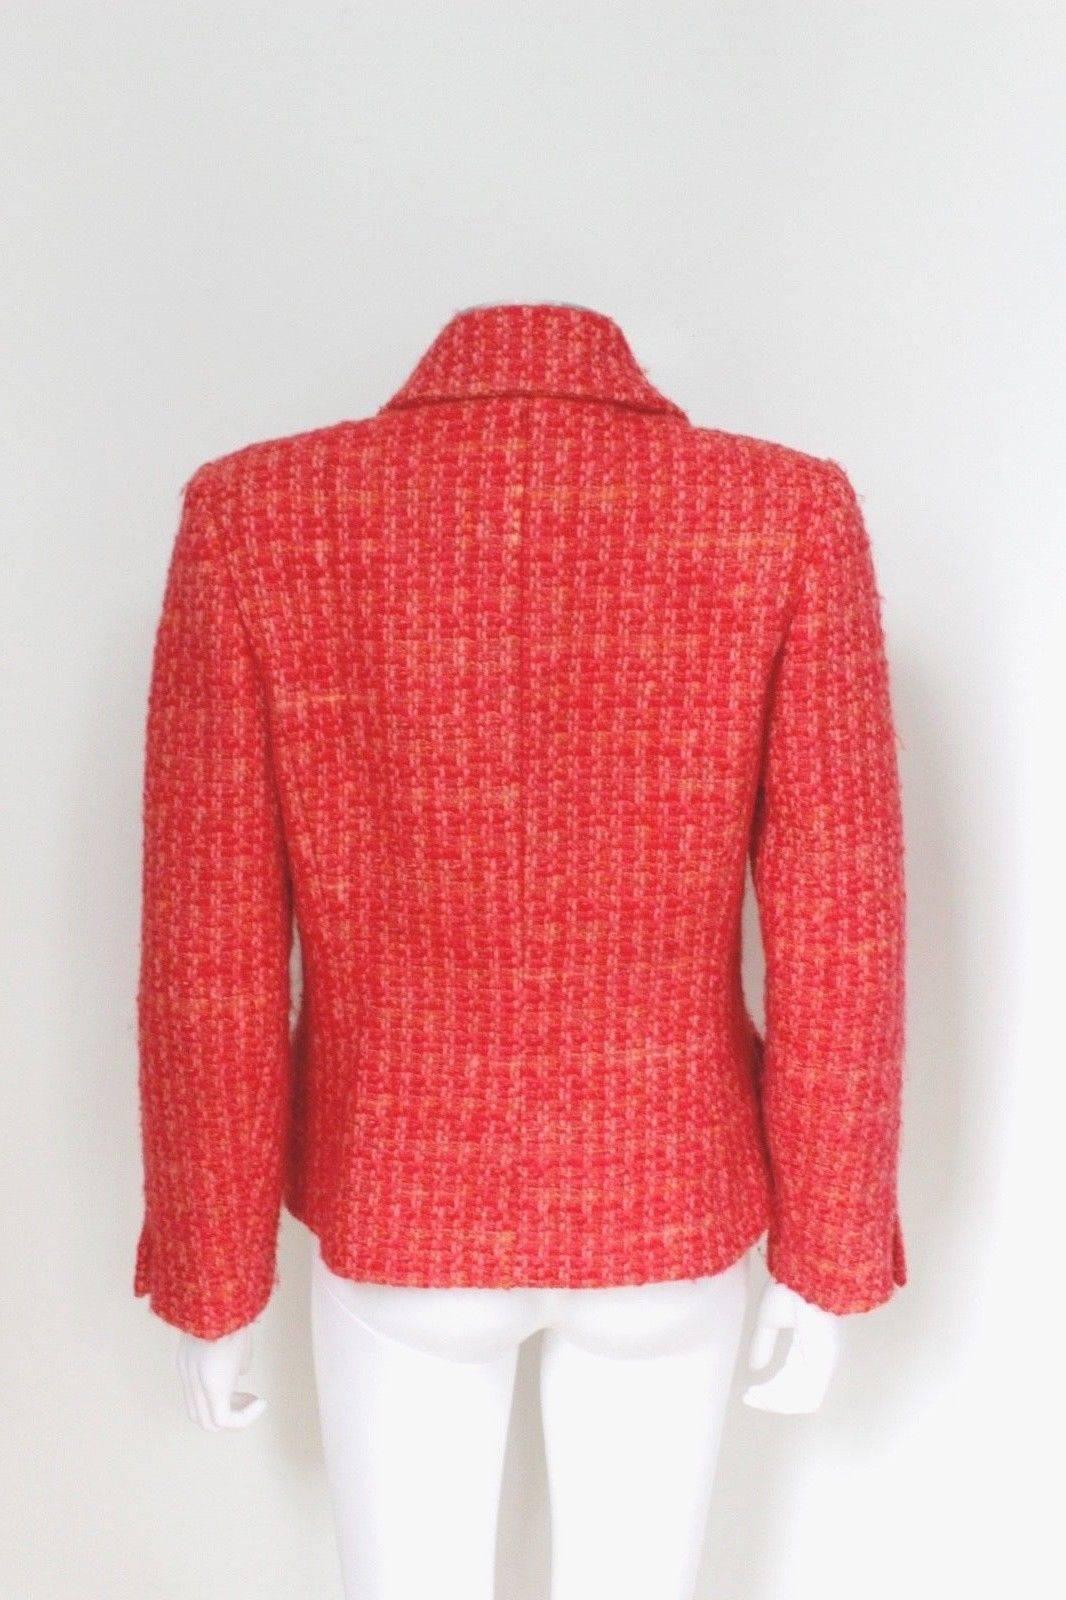 Authentic Chanel Red Tweed Jacket F 40 uk 12   For Sale 1